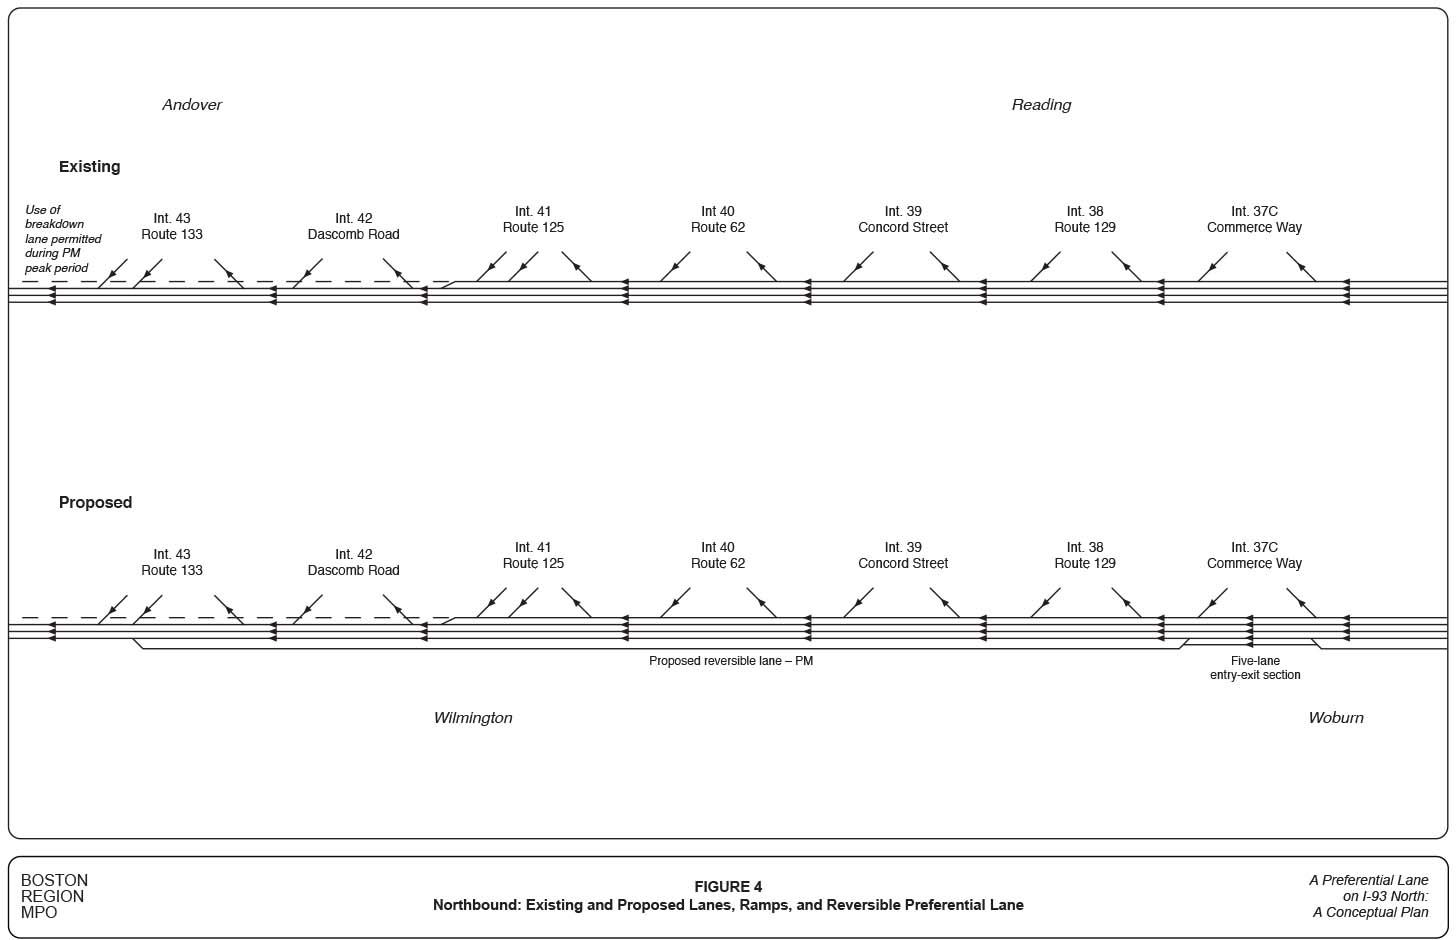 FIGURE 4. Northbound: Existing and Proposed Lanes, Ramps, and Reversible Preferential Lane
Figure 4 presents the proposed preferential lane system in schematic format, which shows existing and proposed northbound lanes and ramps as they would be utilized during the PM peak period. 
